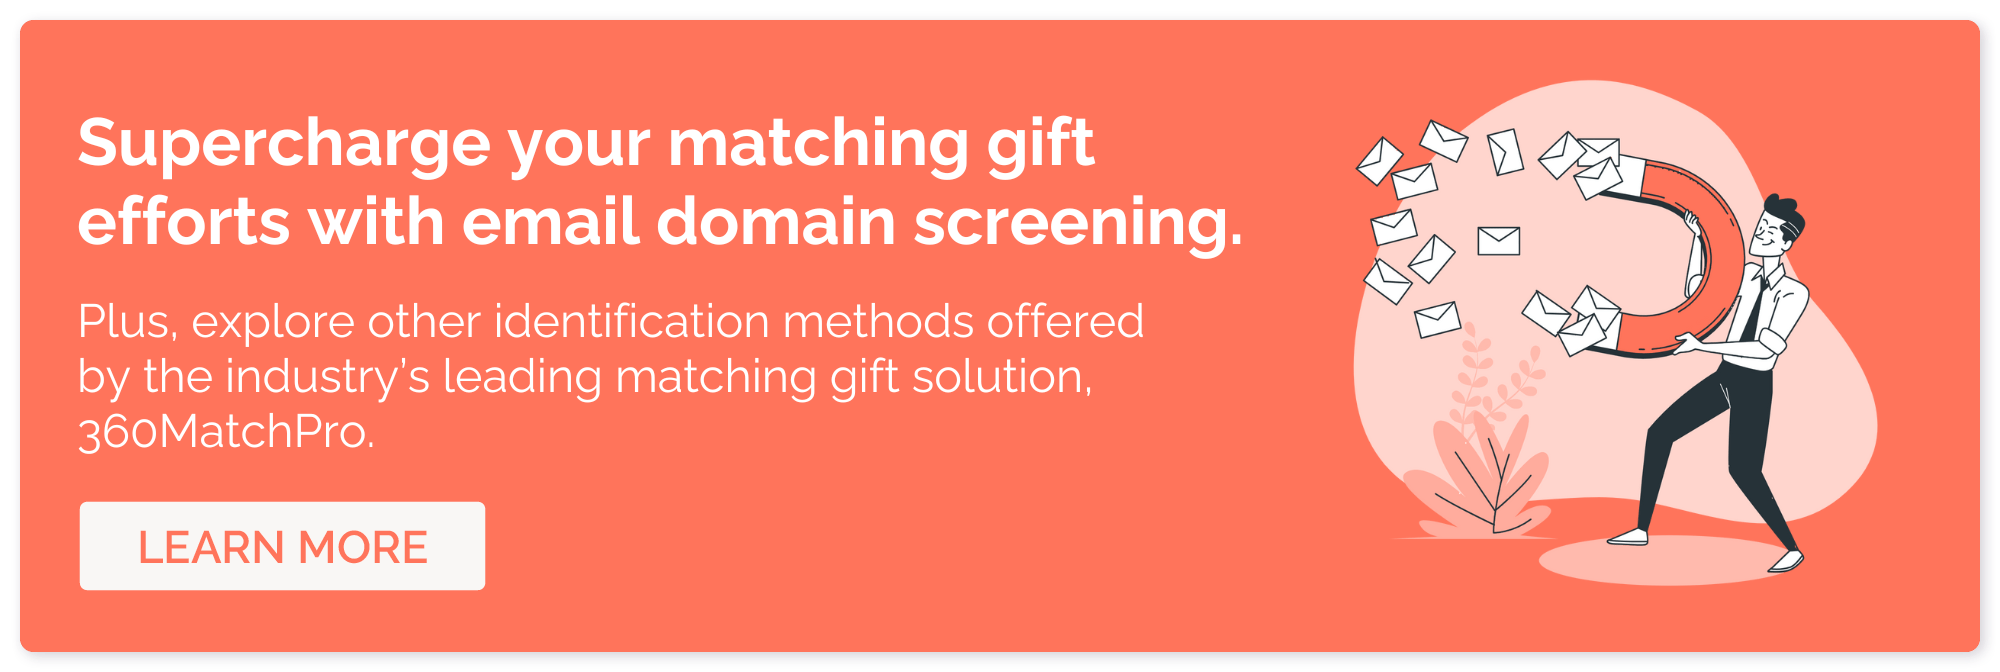 Supercharge matching gifts with email domain screening from Double the Donation.